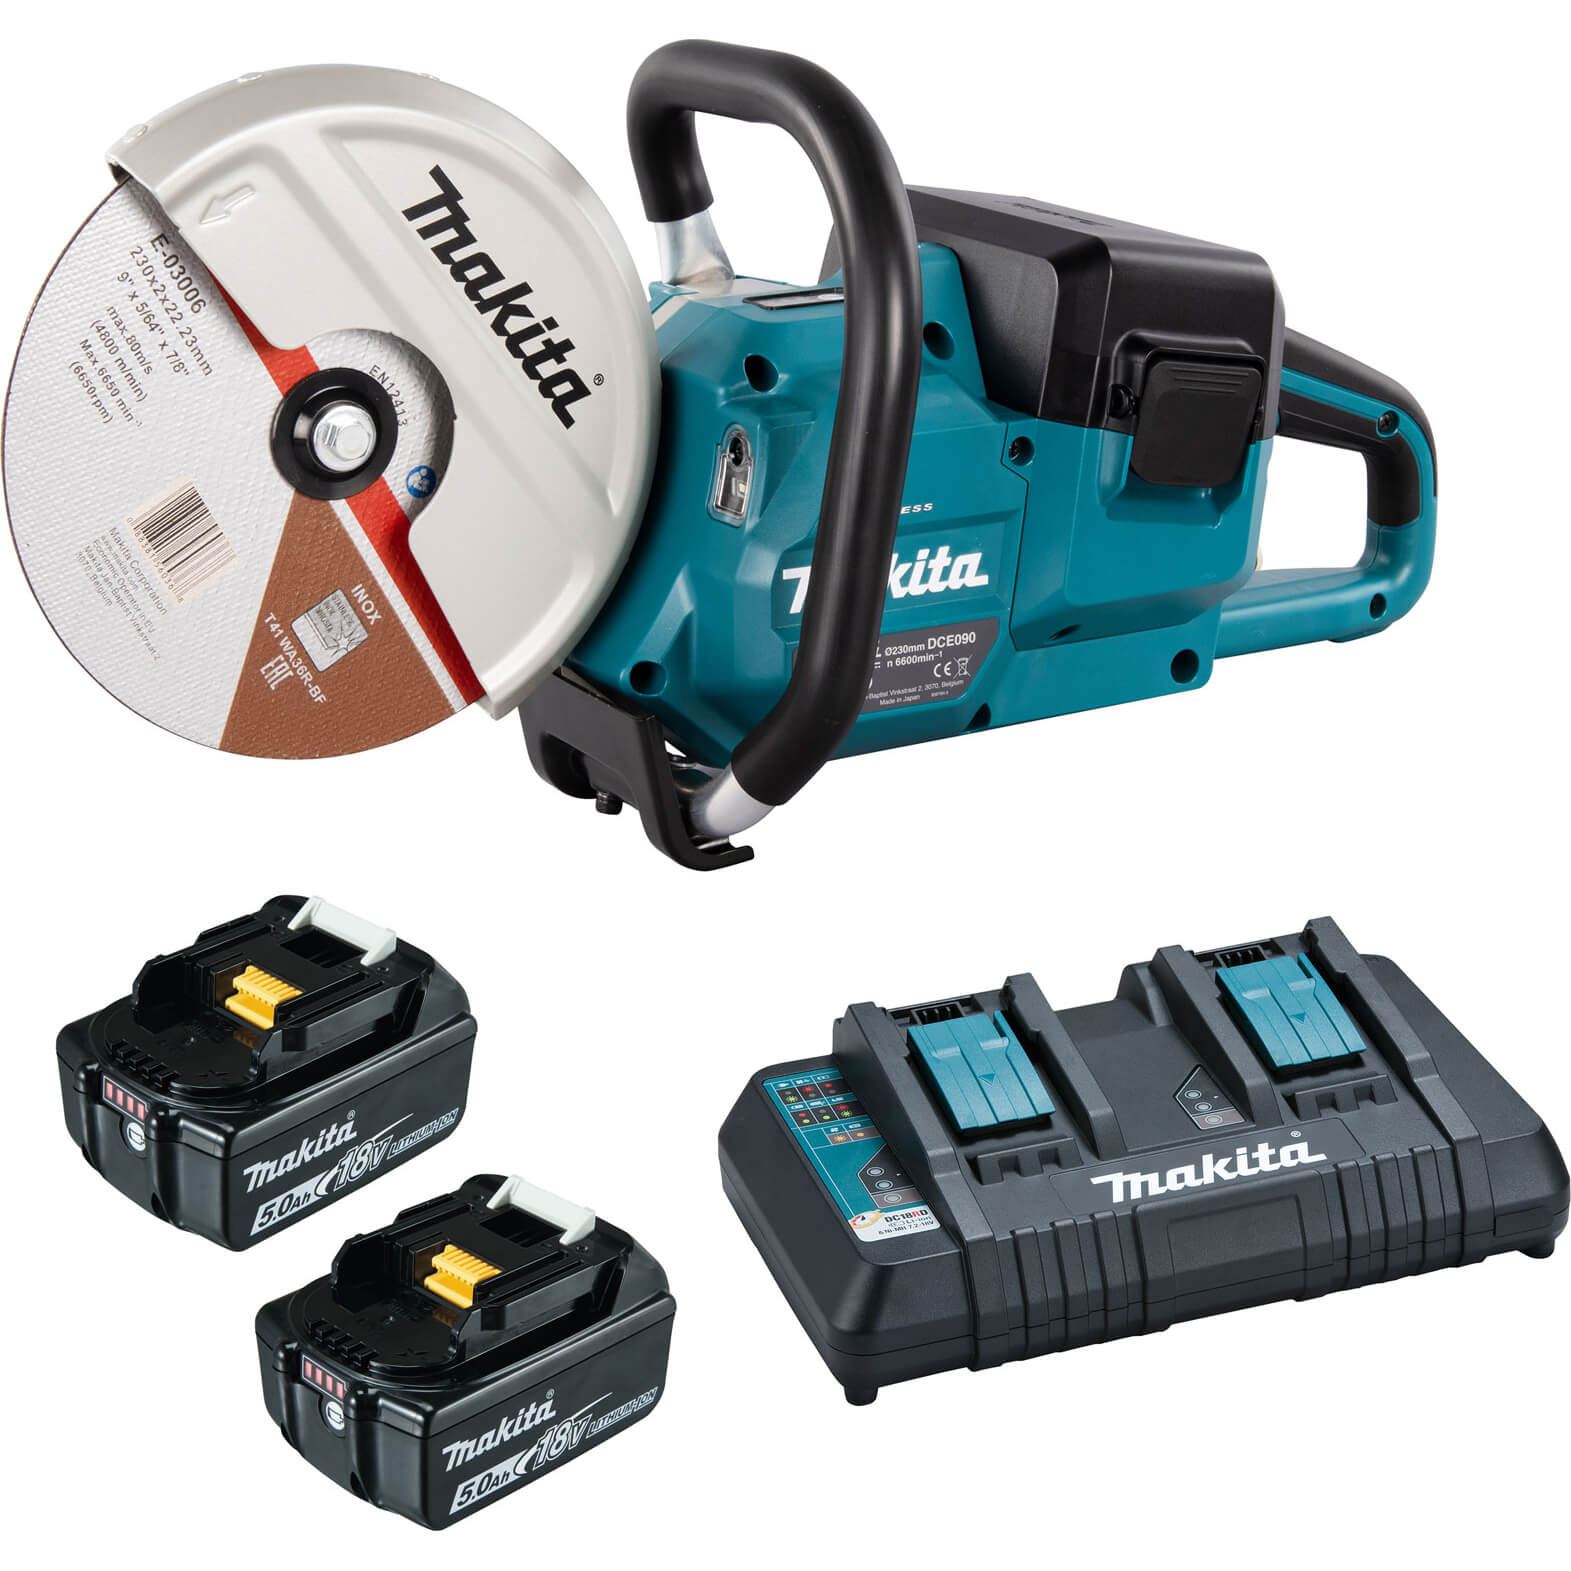 Makita DCE090 Twin 18v LXT Cordless Brushless Disc Cutter 230mm 2 x 5ah Li-ion Charger No Case